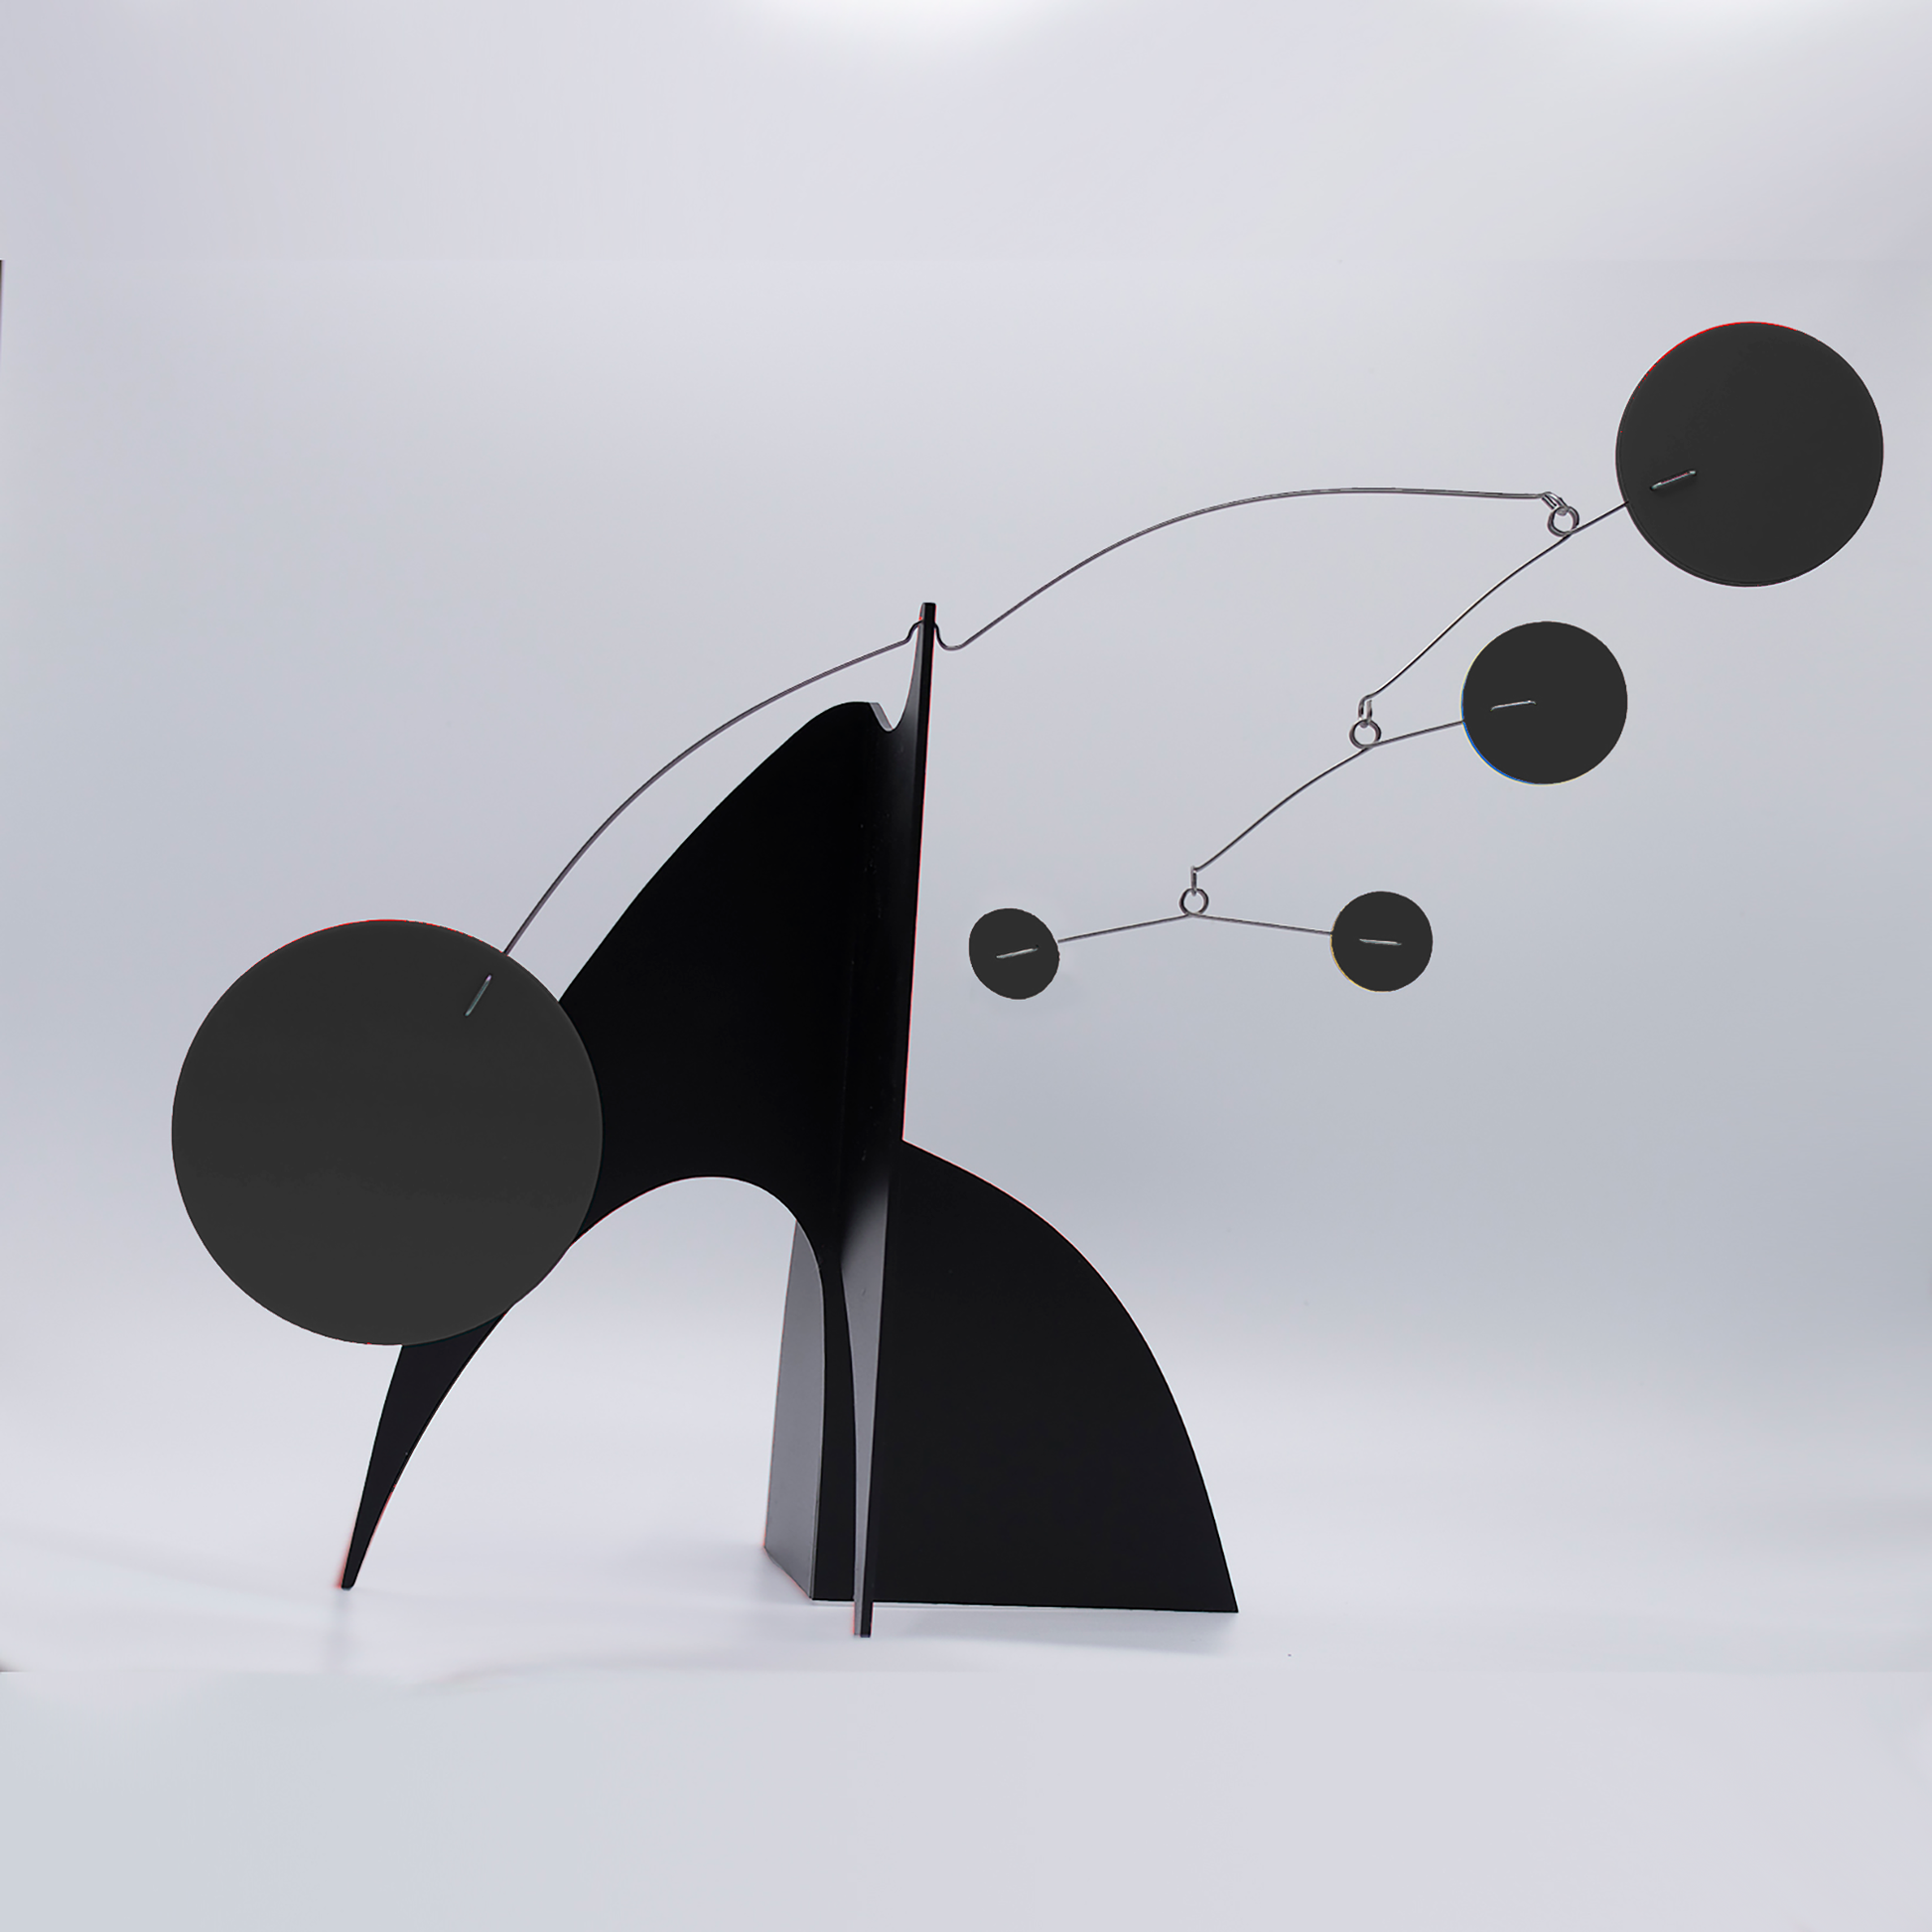 Beautiful Moderne Art Stabile in all black - mid century modern inspired abstract modern art - tabletop kinetic art sculpture mobiles hand made with glossy plexiglass acrylic in Los Angeles by Debra Ann of AtomicMobiles.com